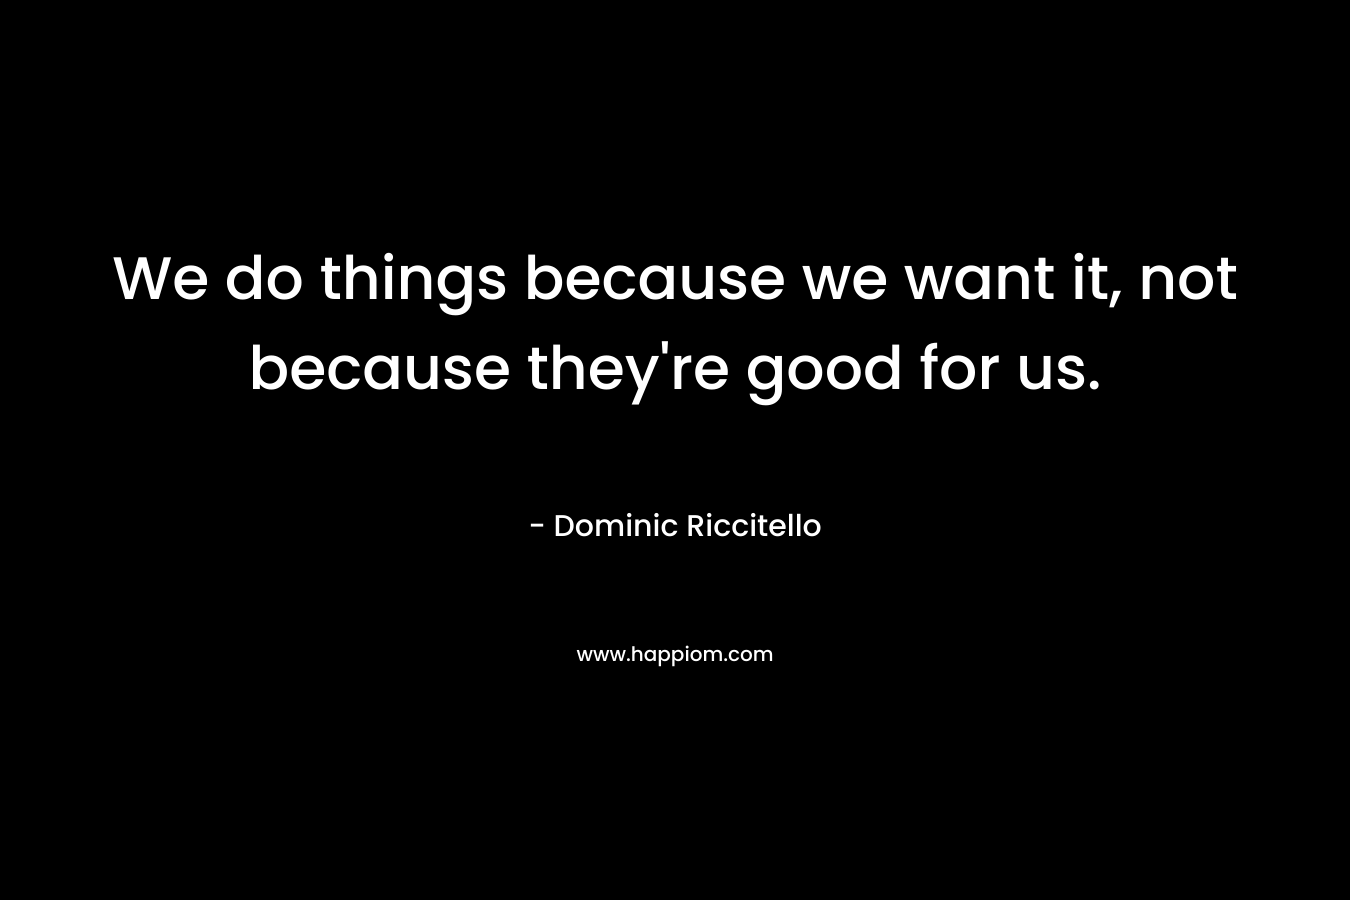 We do things because we want it, not because they're good for us.